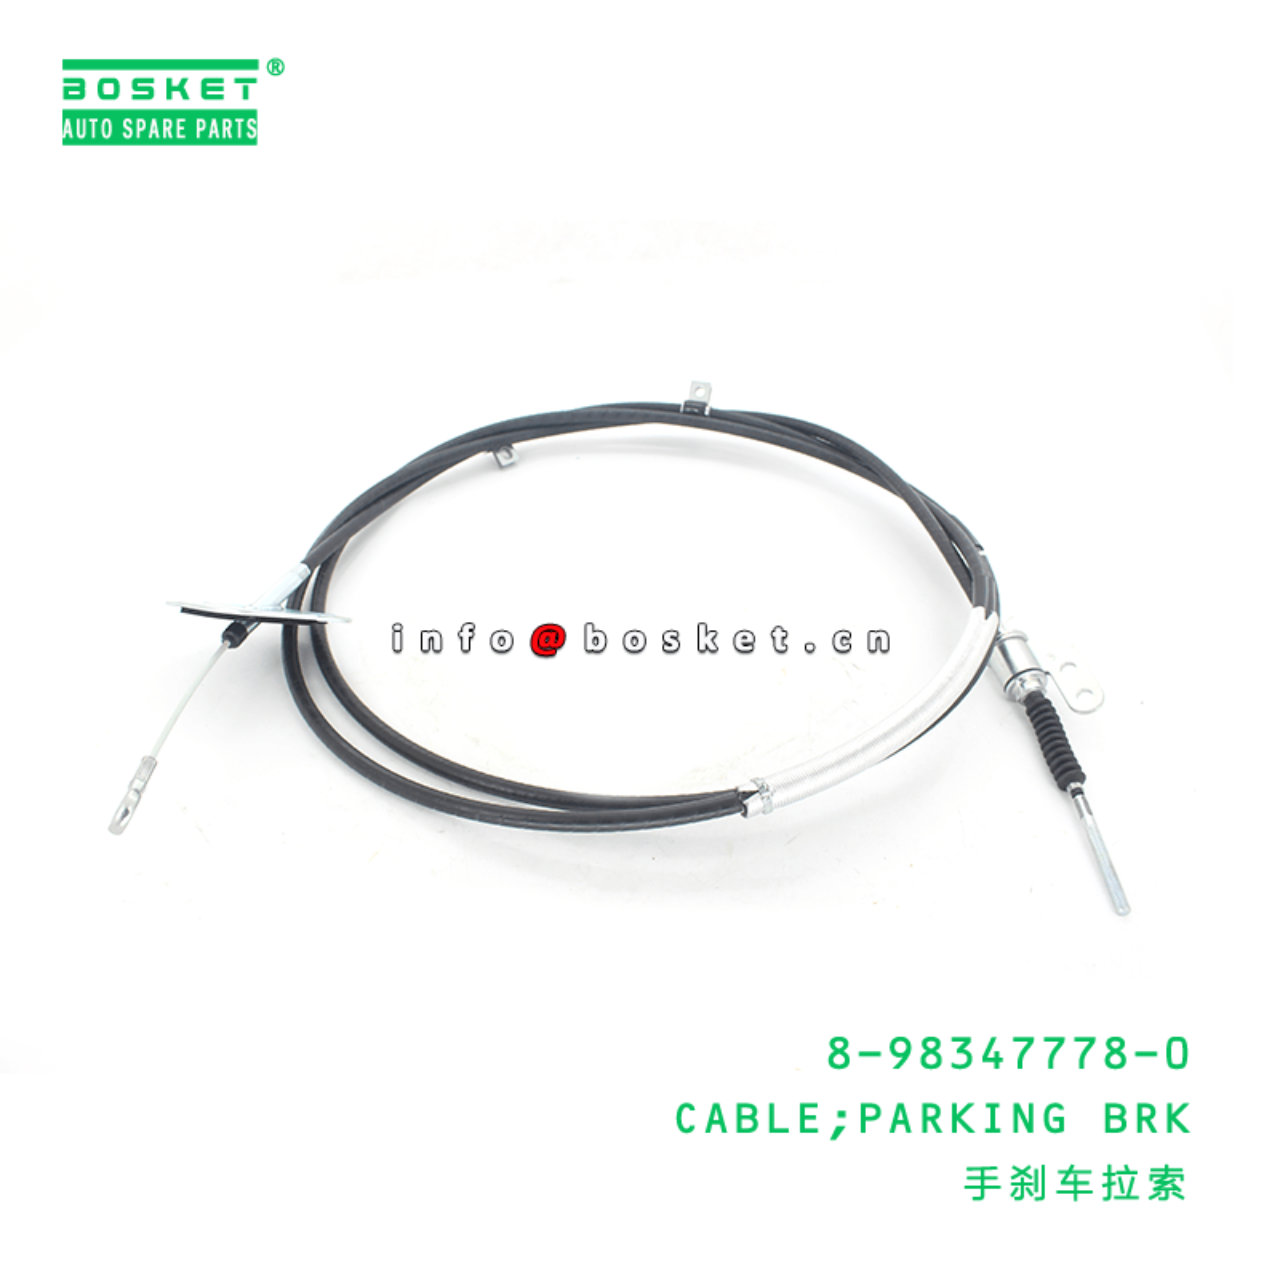 8-98347778-0 Parking Brake Cable 8983477780 Suitable for ISUZU FVR